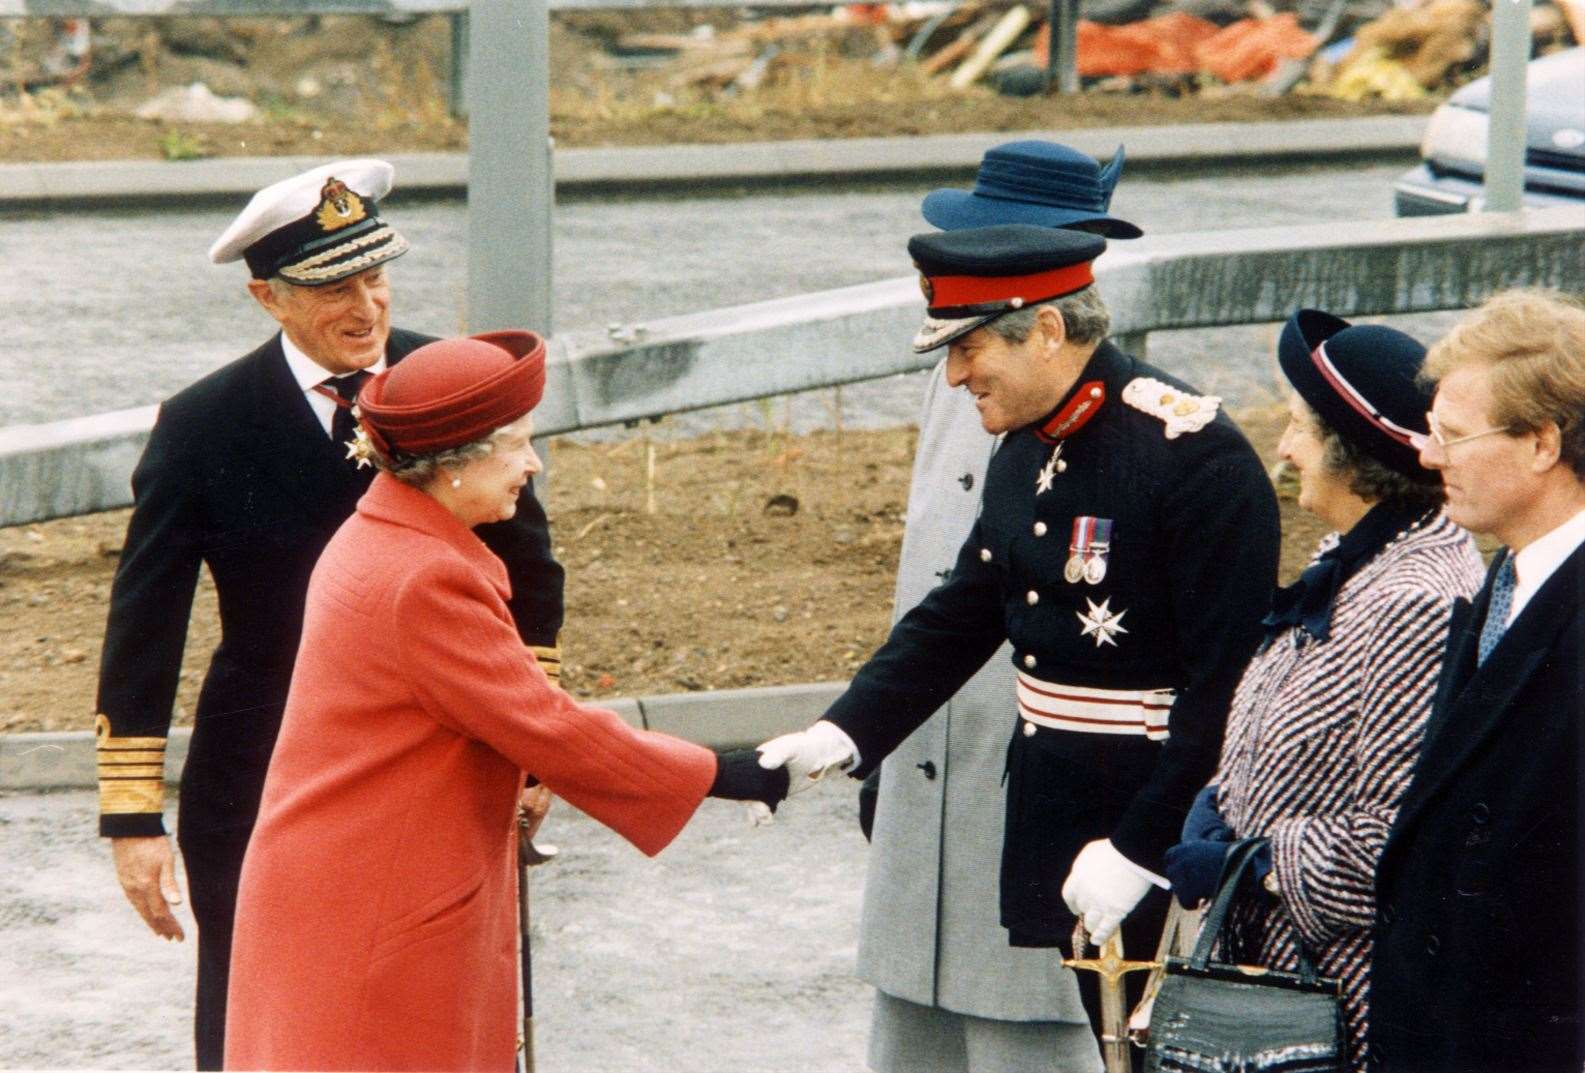 The Lord Lieutenant of Kent greets the Queen before the official opening in 1991